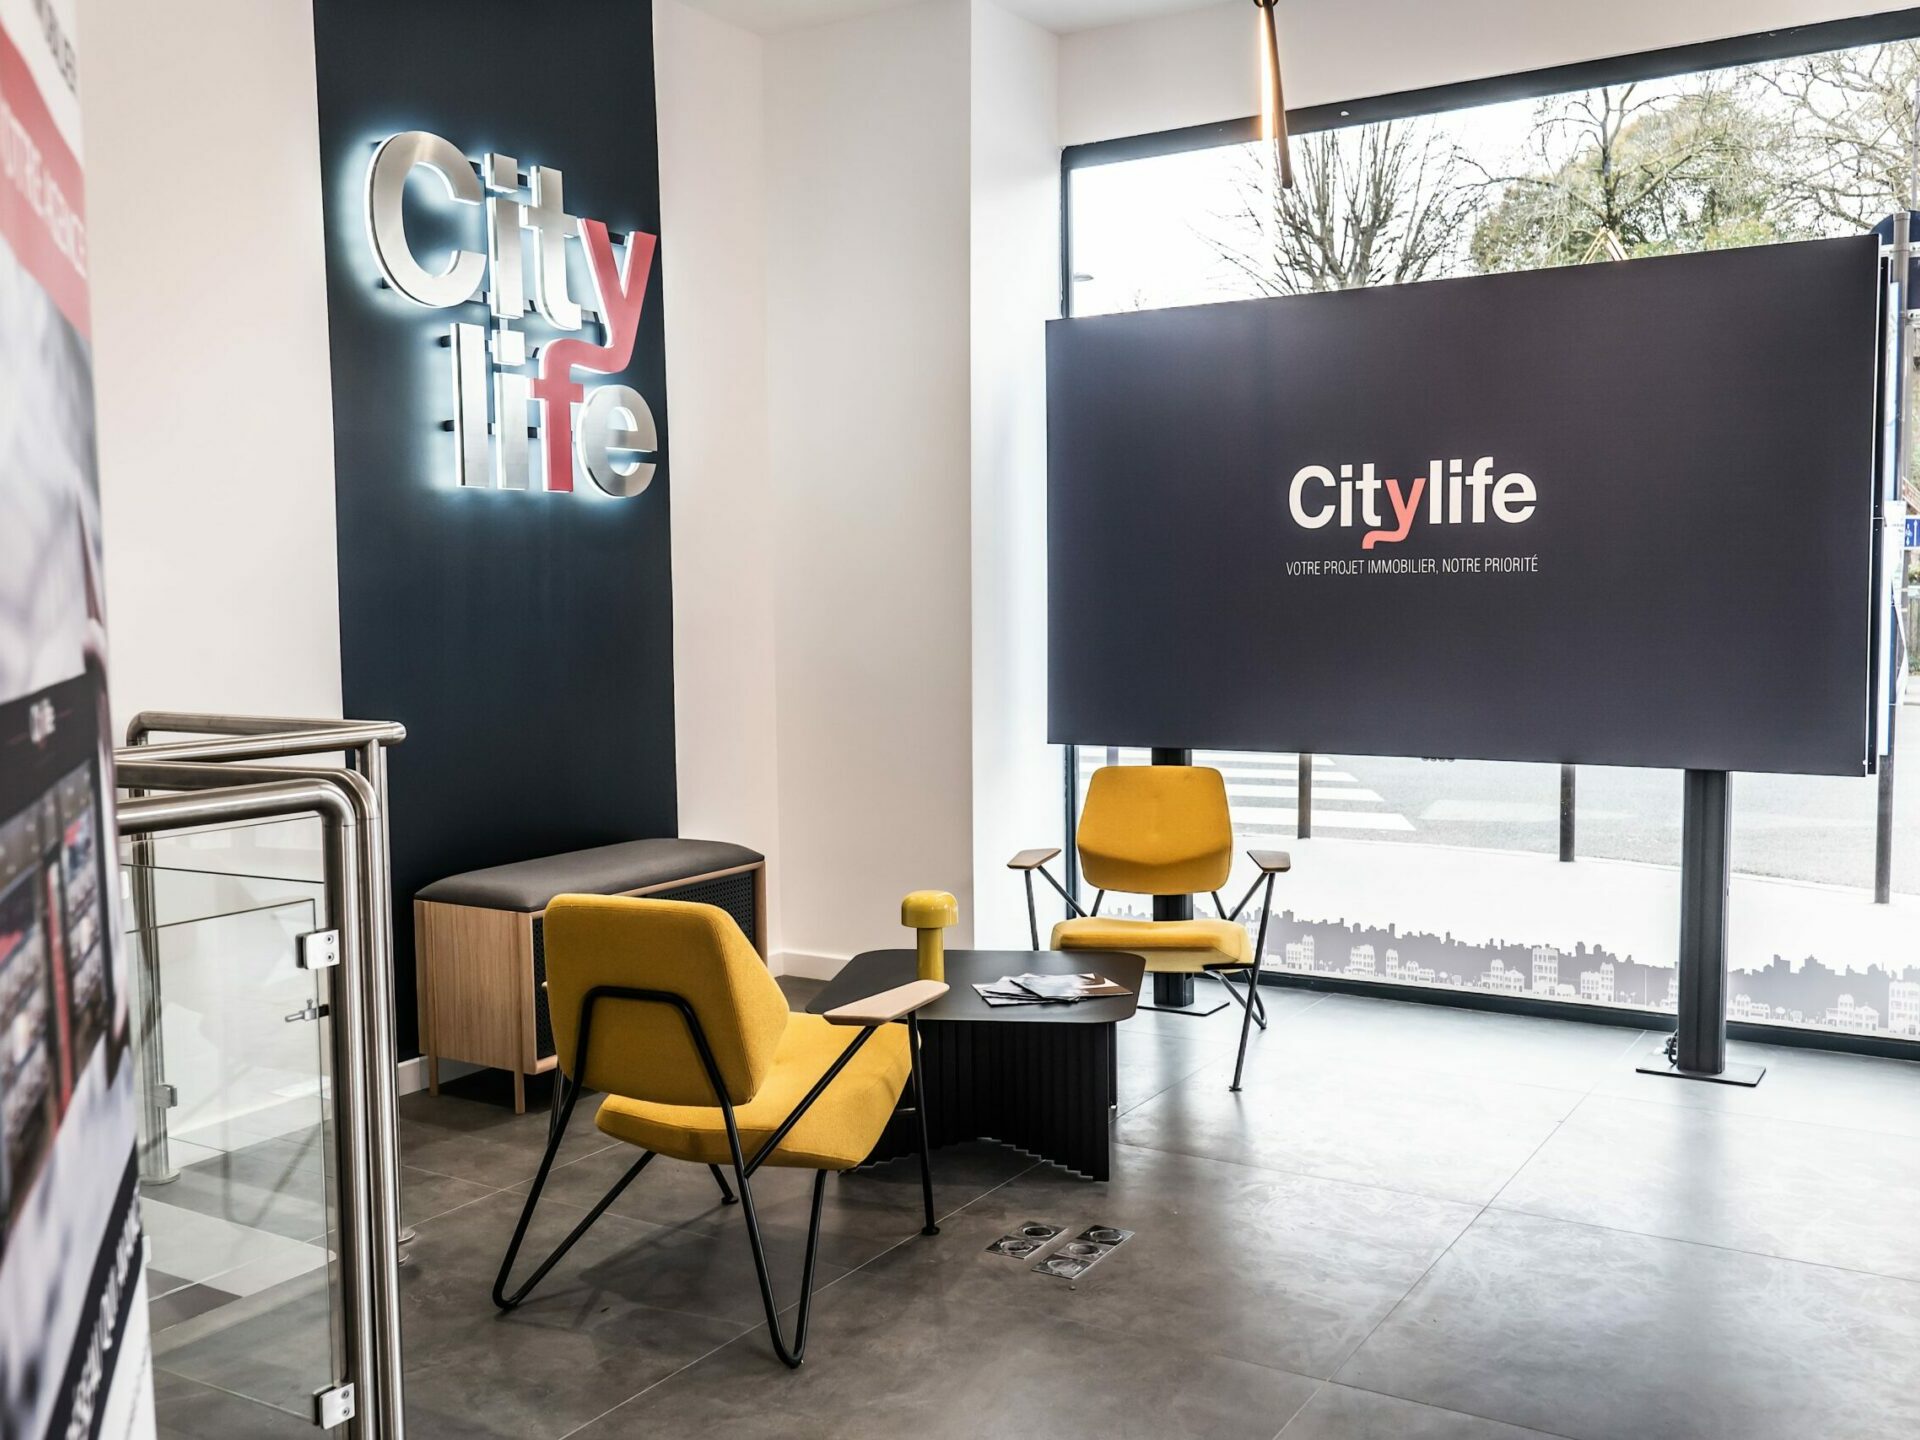 CityLife Immobilier